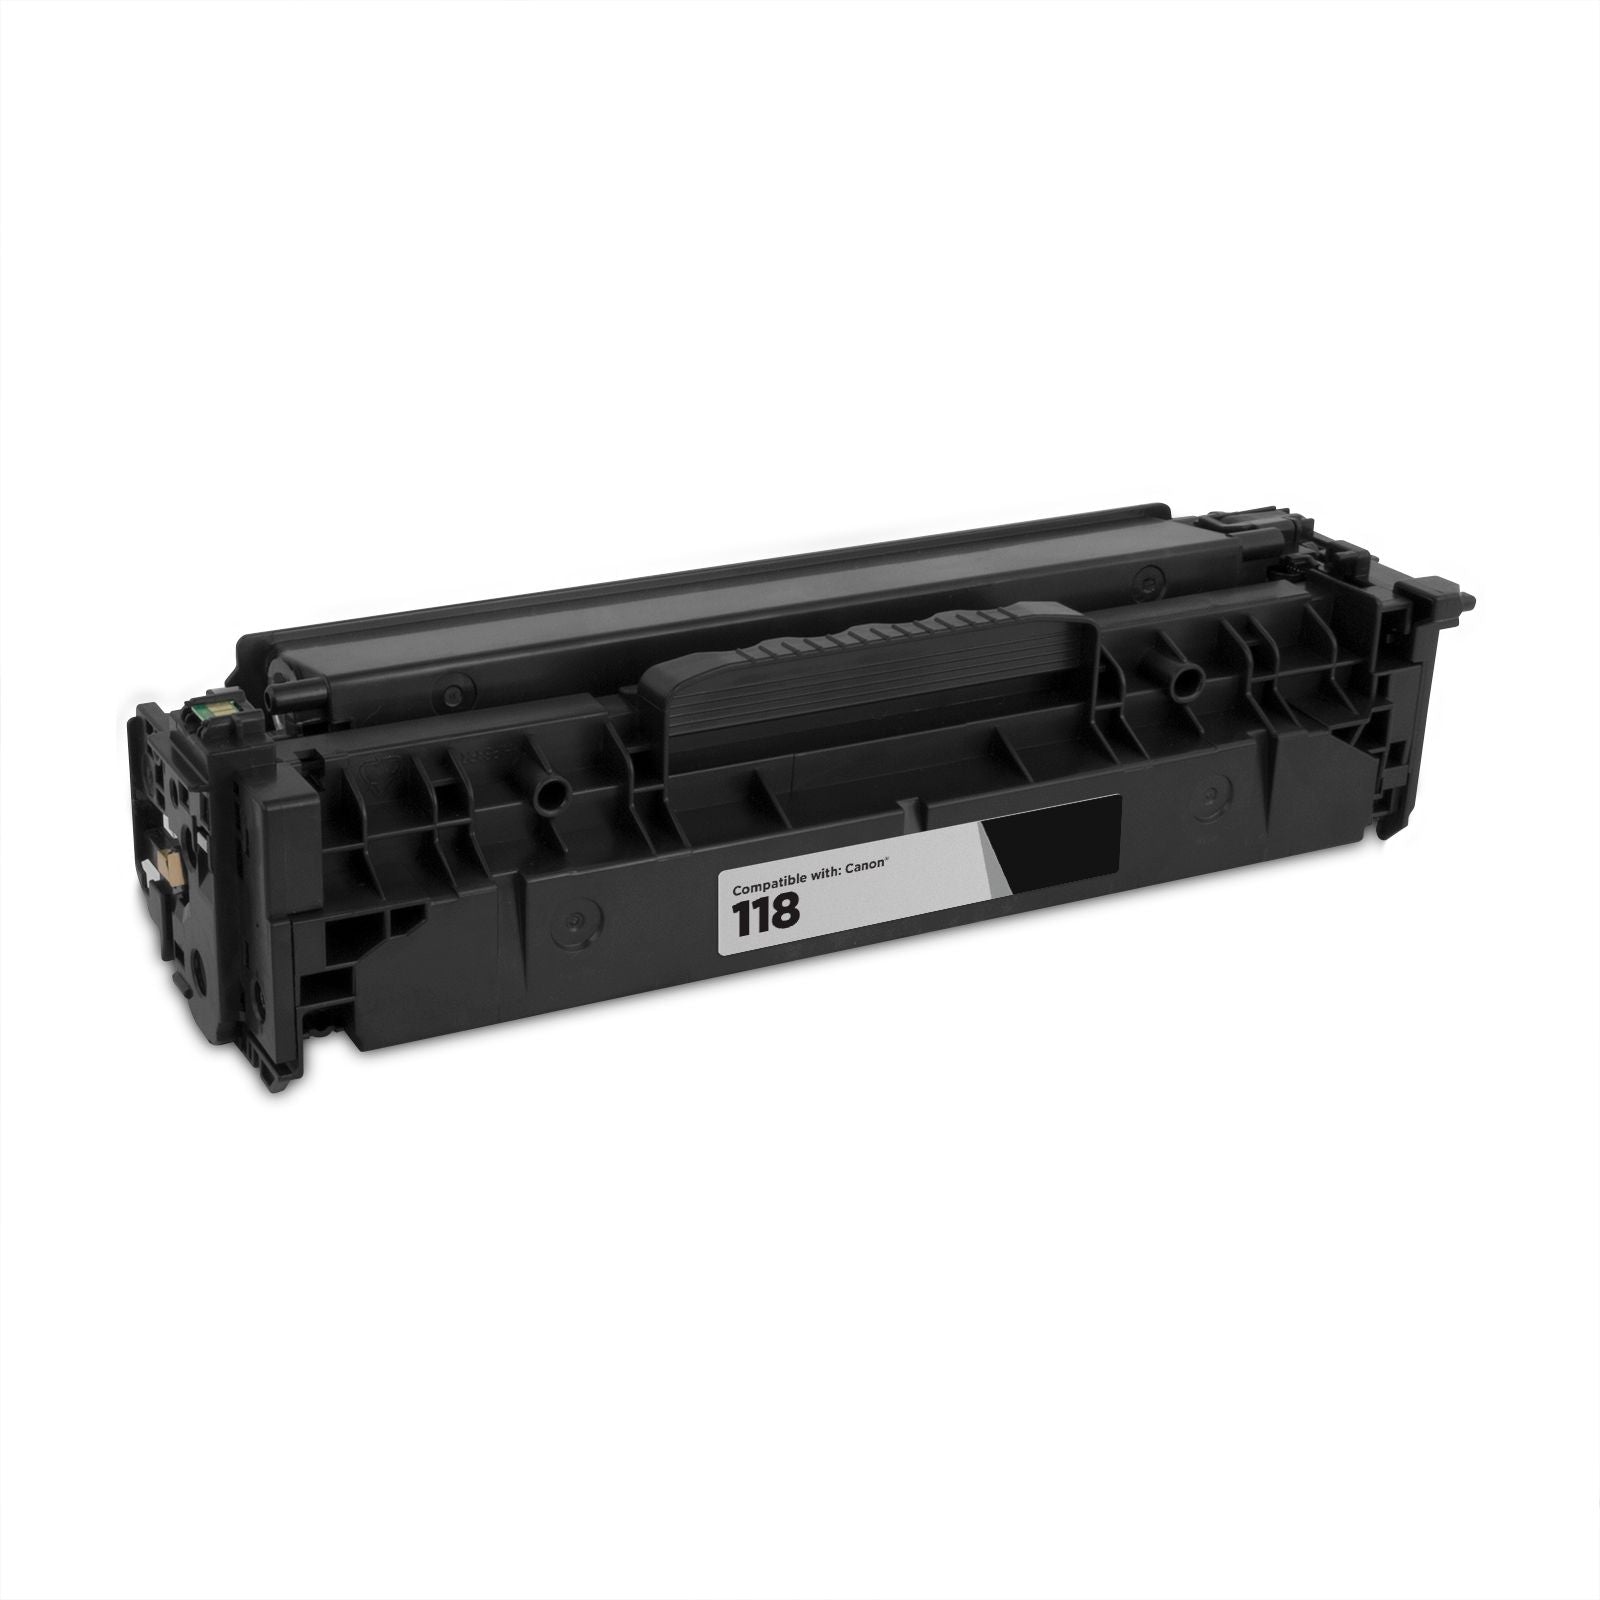 118 BLACK IMPERIAL BRAND CANON 118 LASER TONER 3,400 PAGES